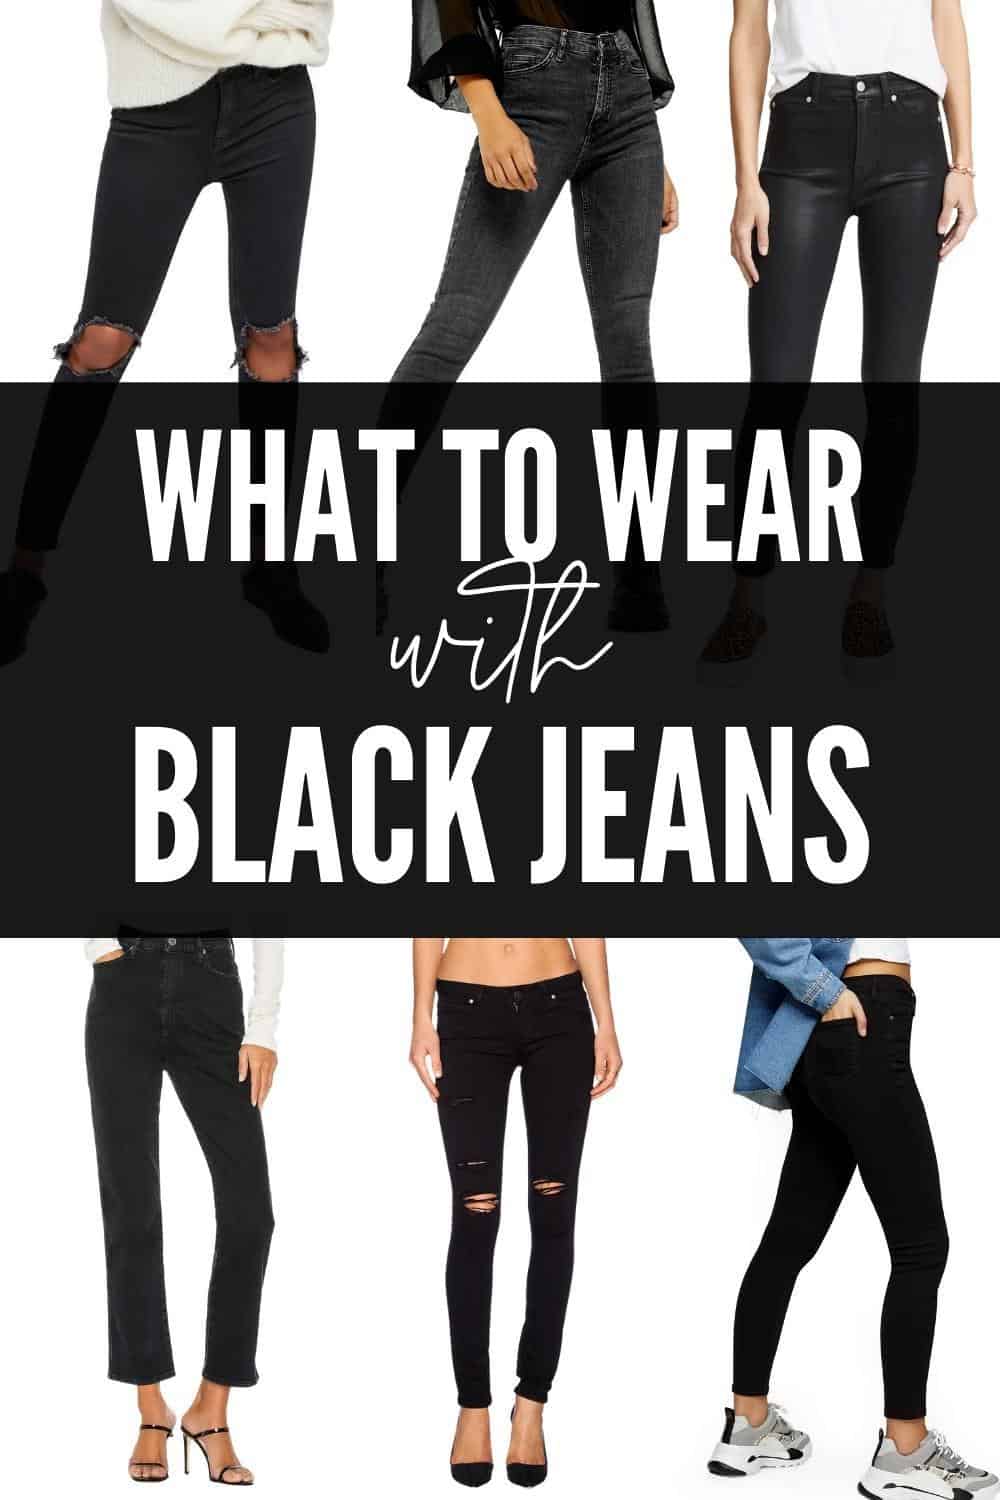 What to Wear with Black Jeans